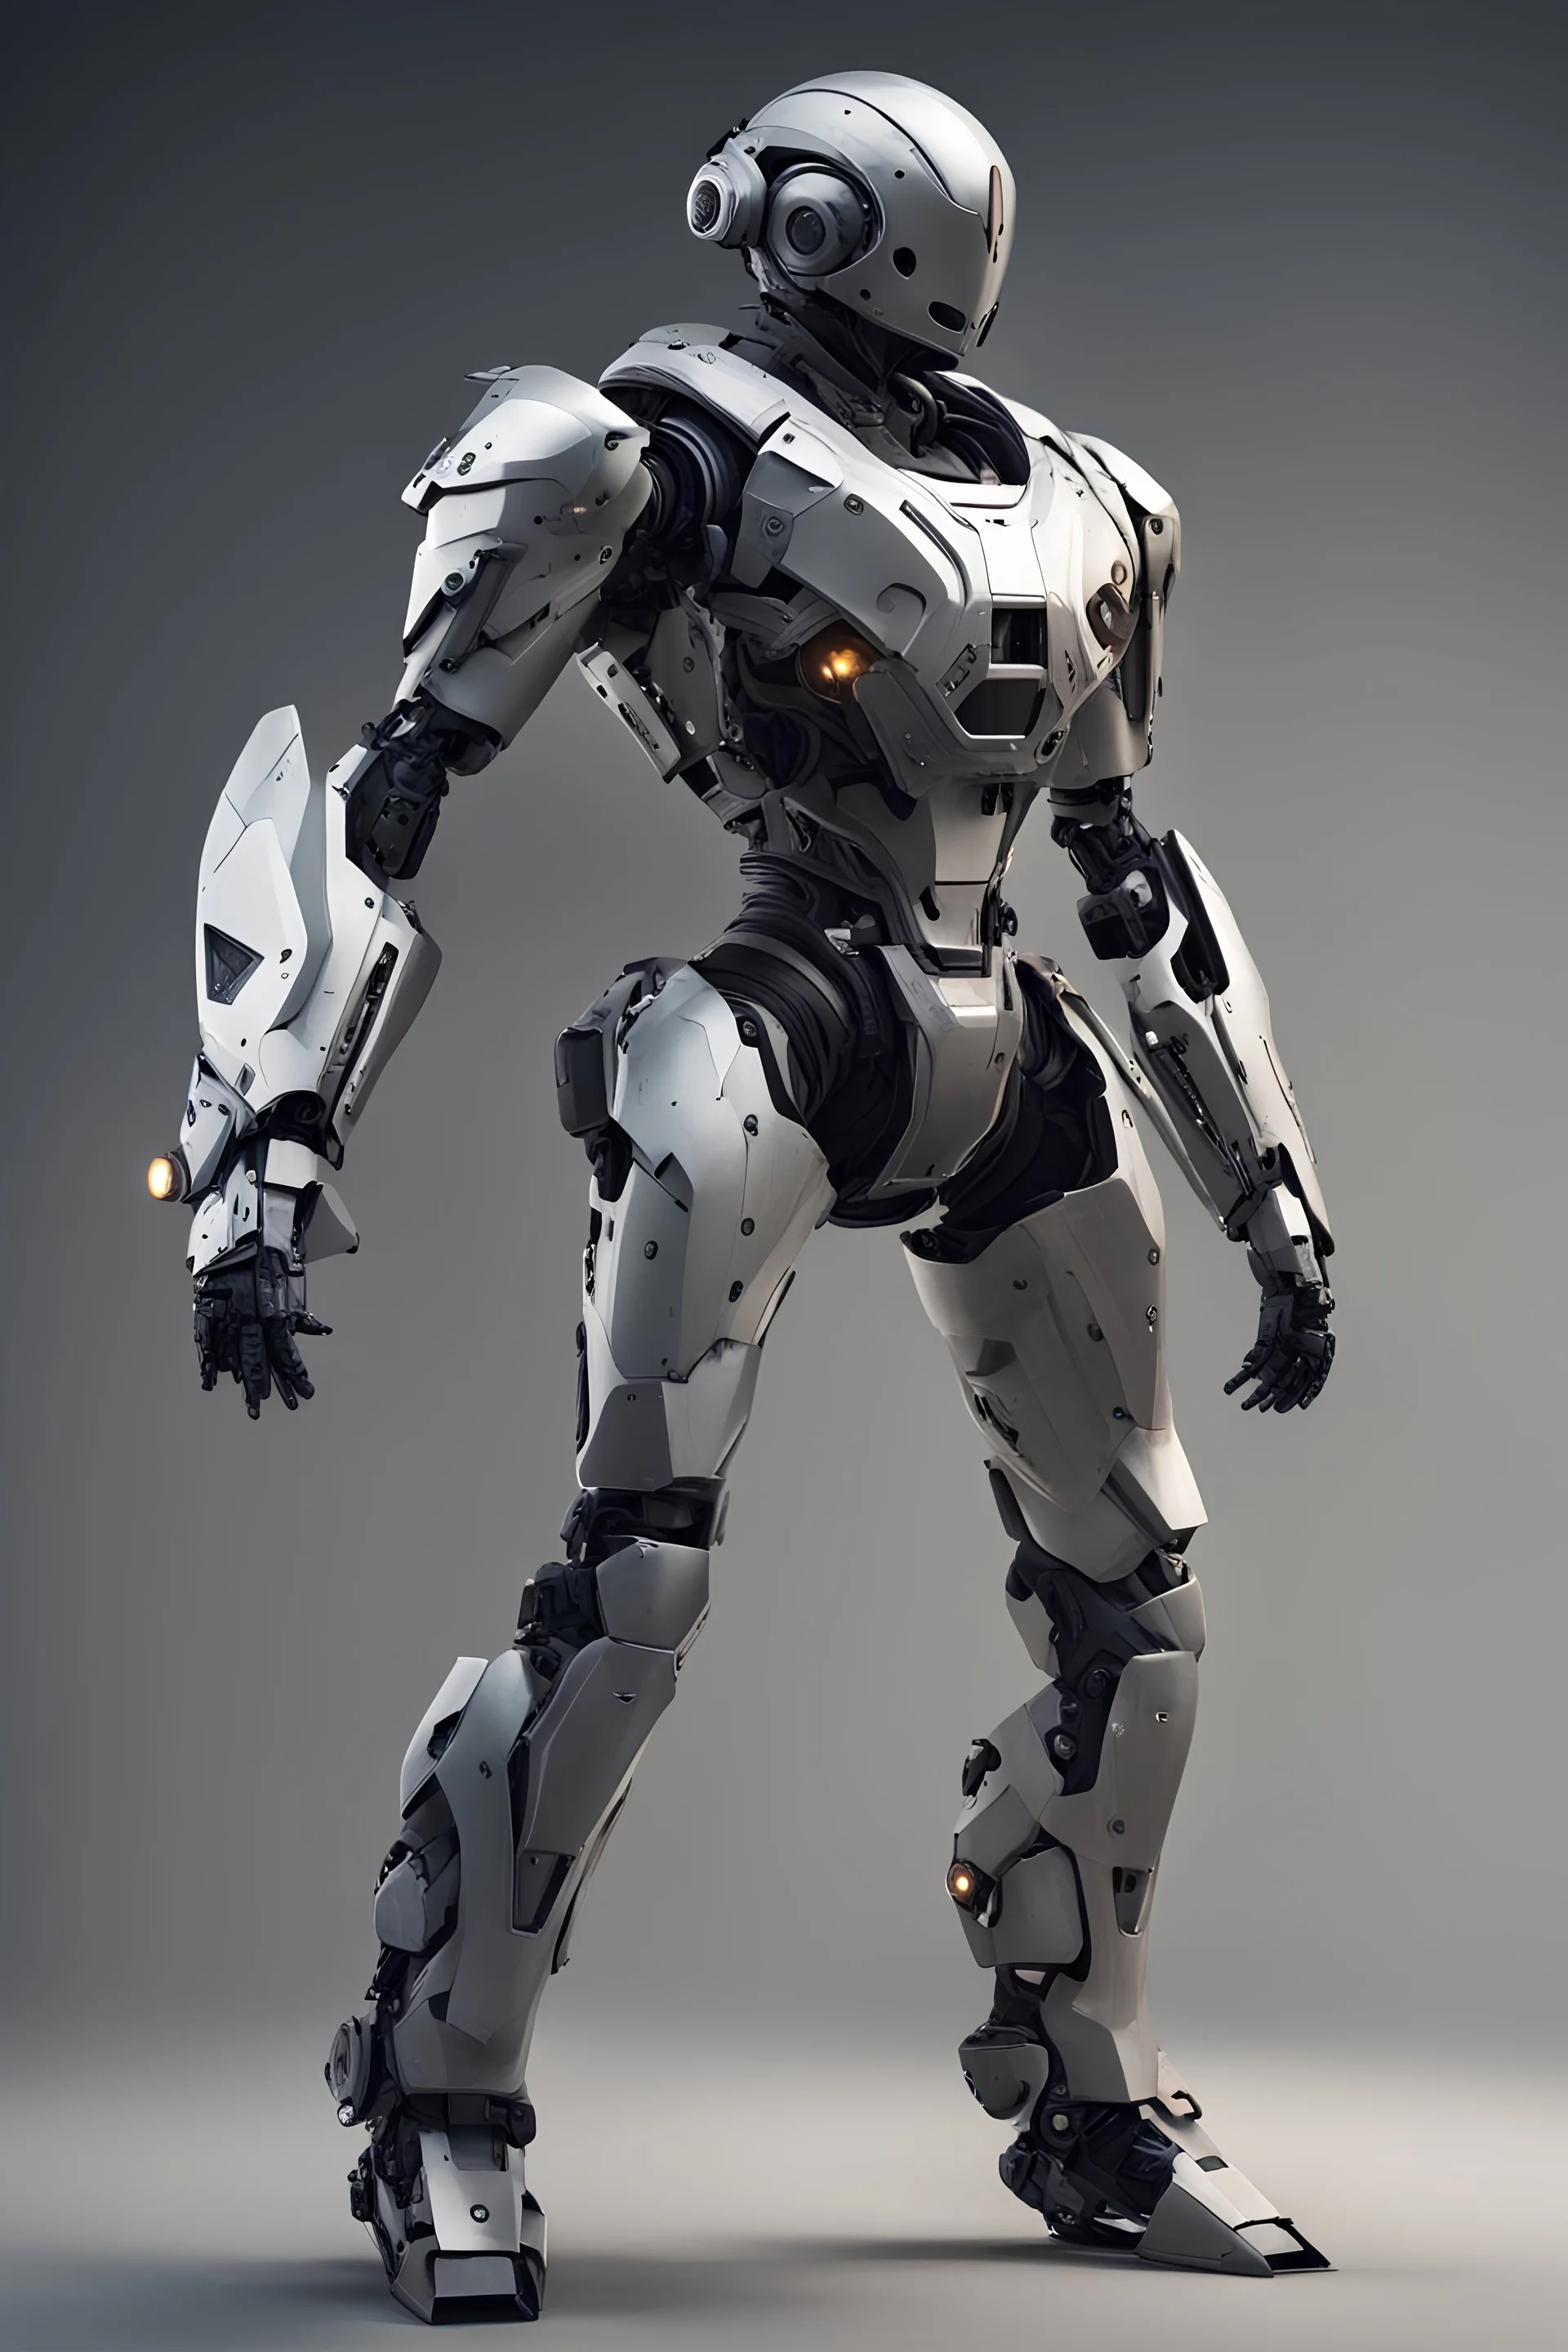 A battle iron suit with the ability to fly, made for humans